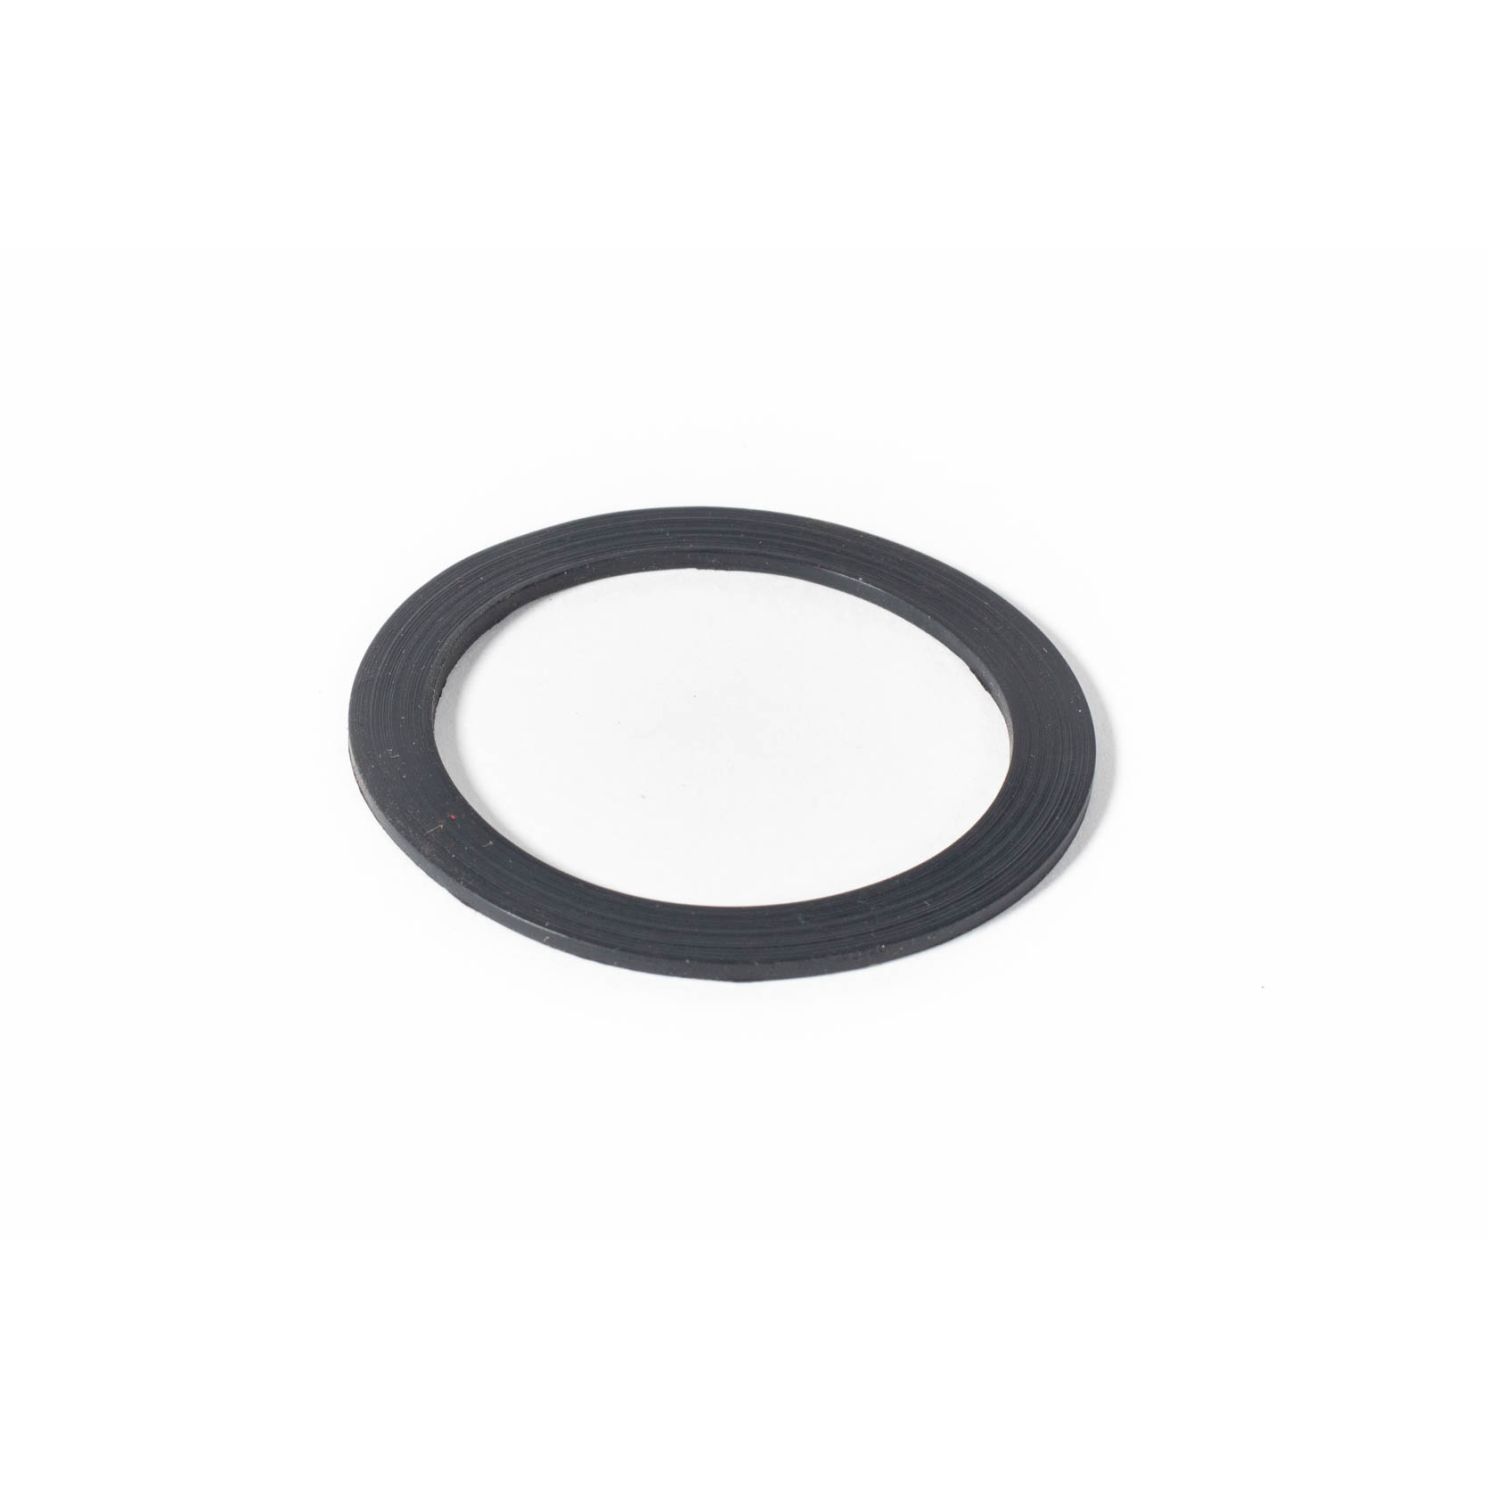 Tractor Sediment Shallow Bowl Gasket